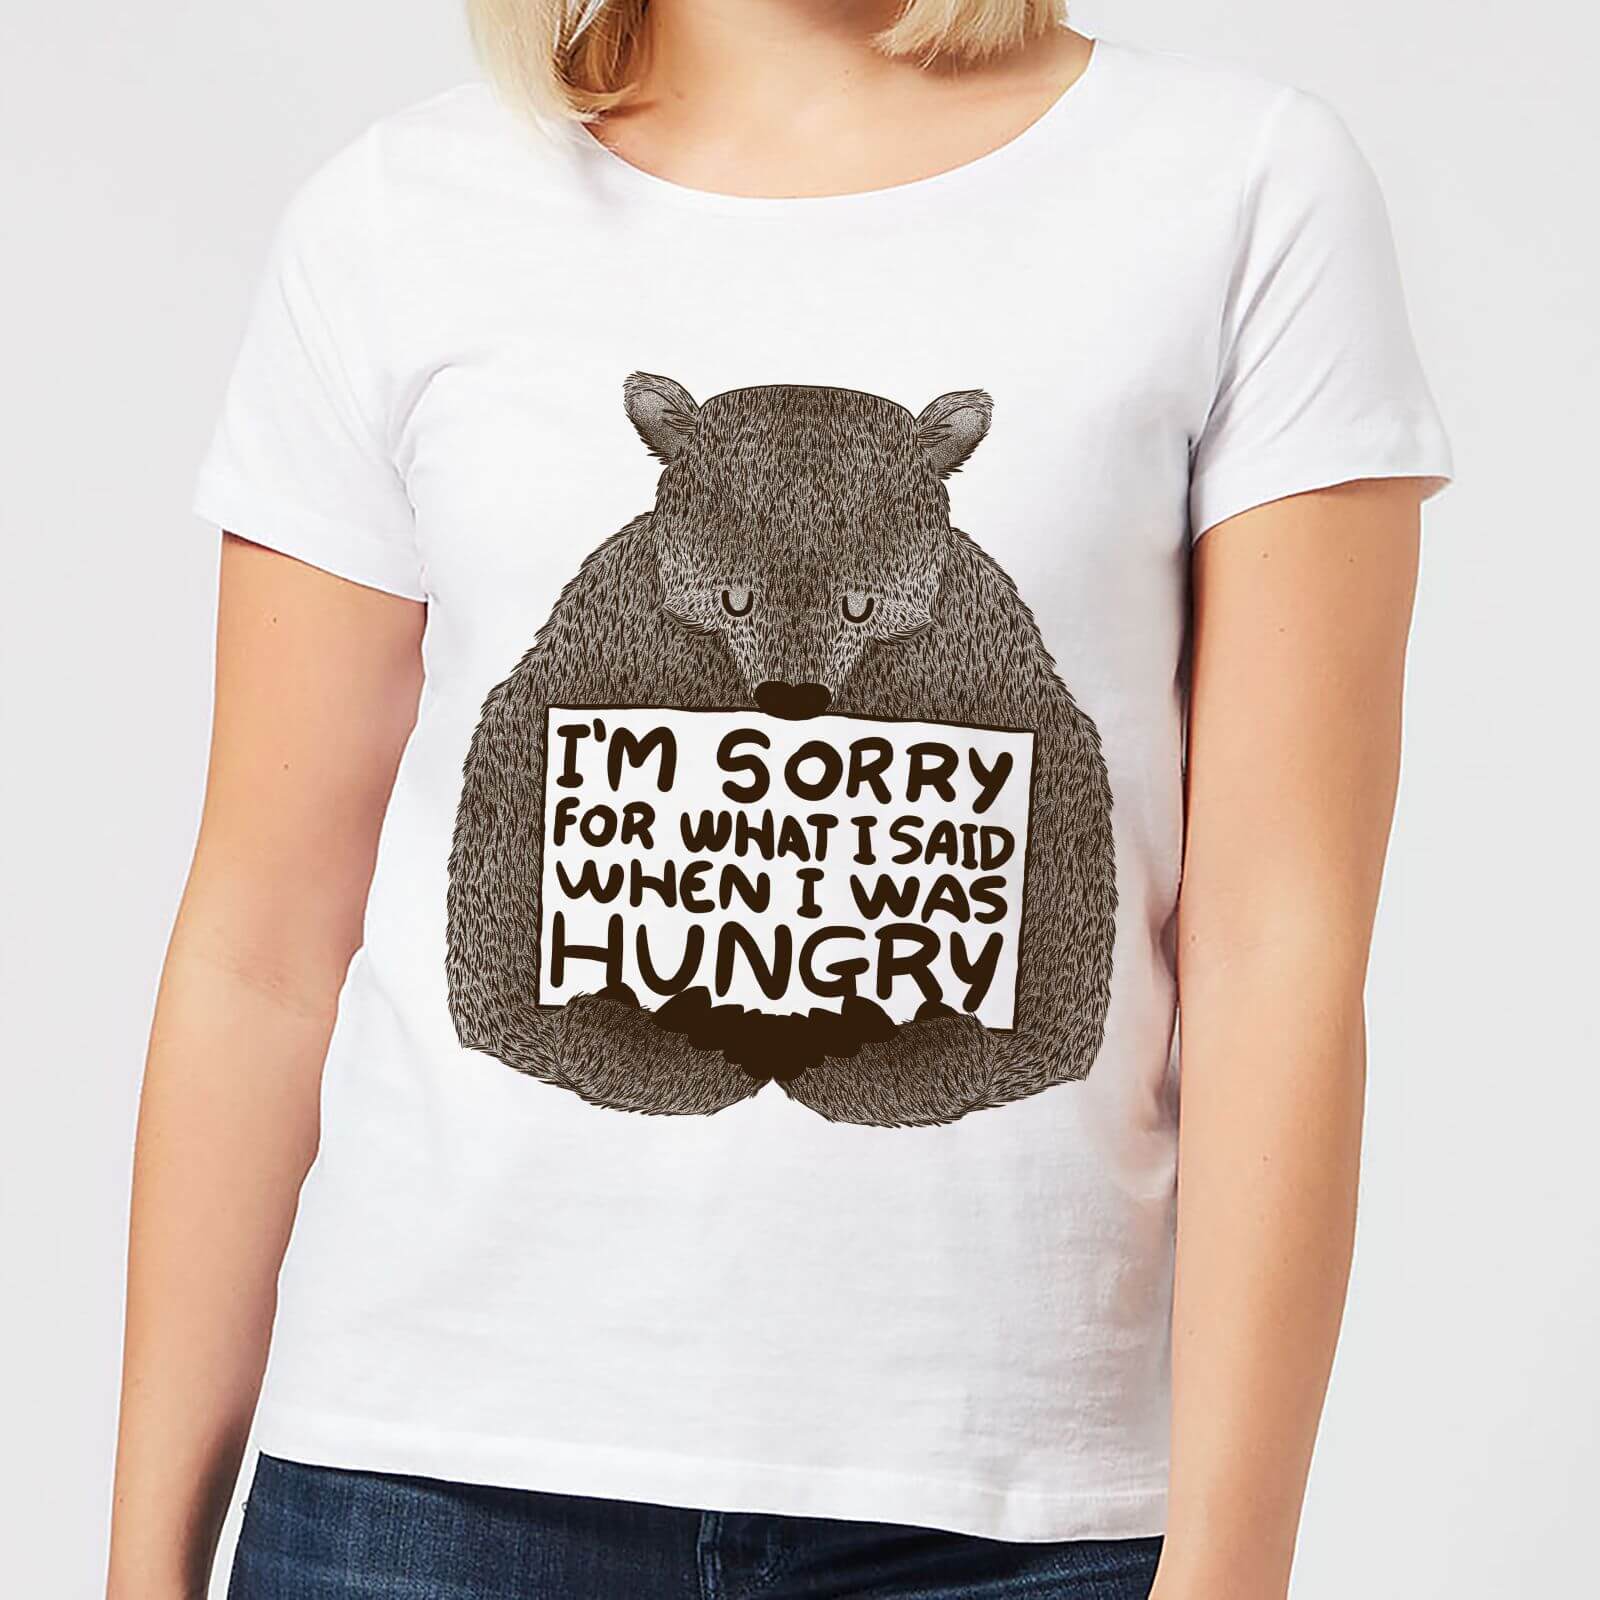 Sorry for What I Said When I Was Hungry Women's T-Shirt - White - S